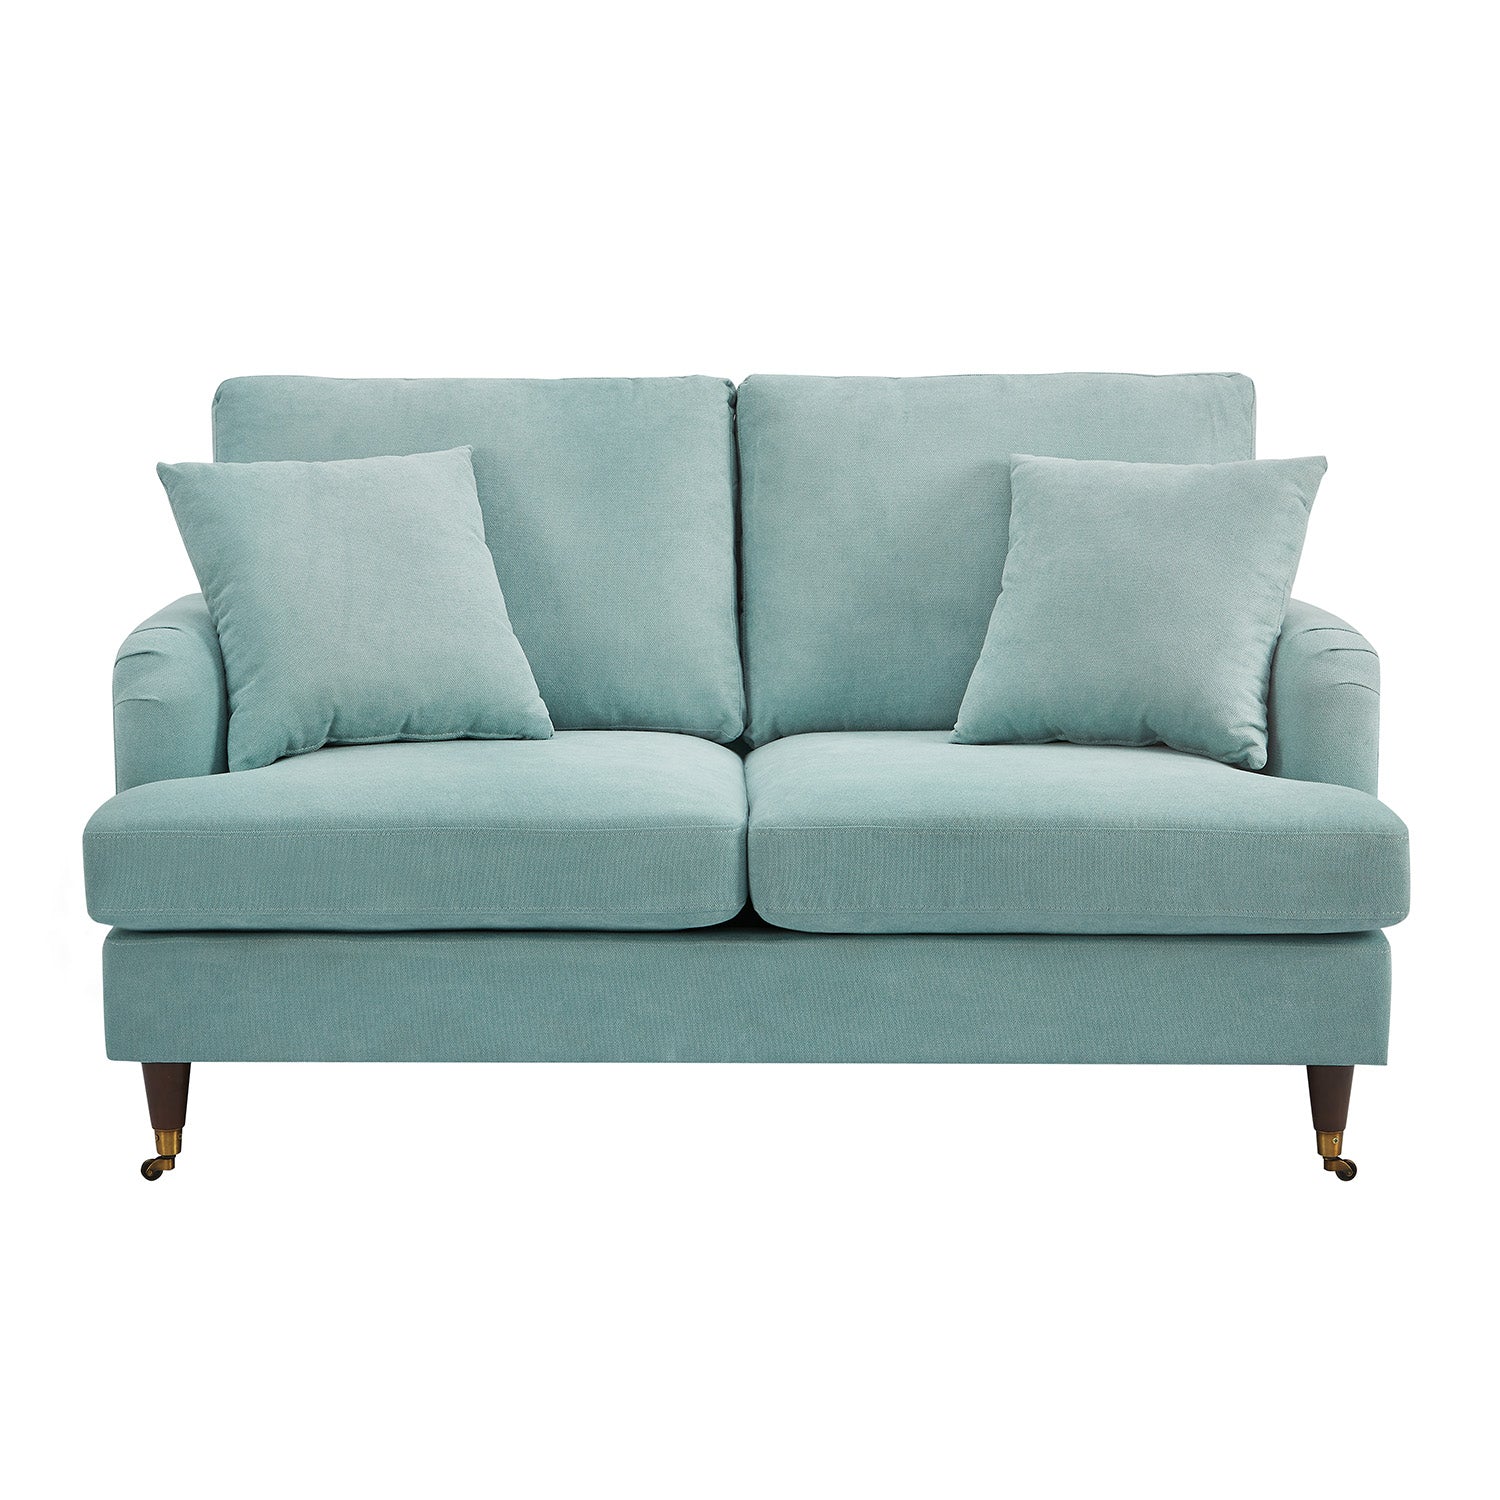 Brigette 2-Seater Mint Soft Brushed Sofa with Antique Brass Castor Legs ...